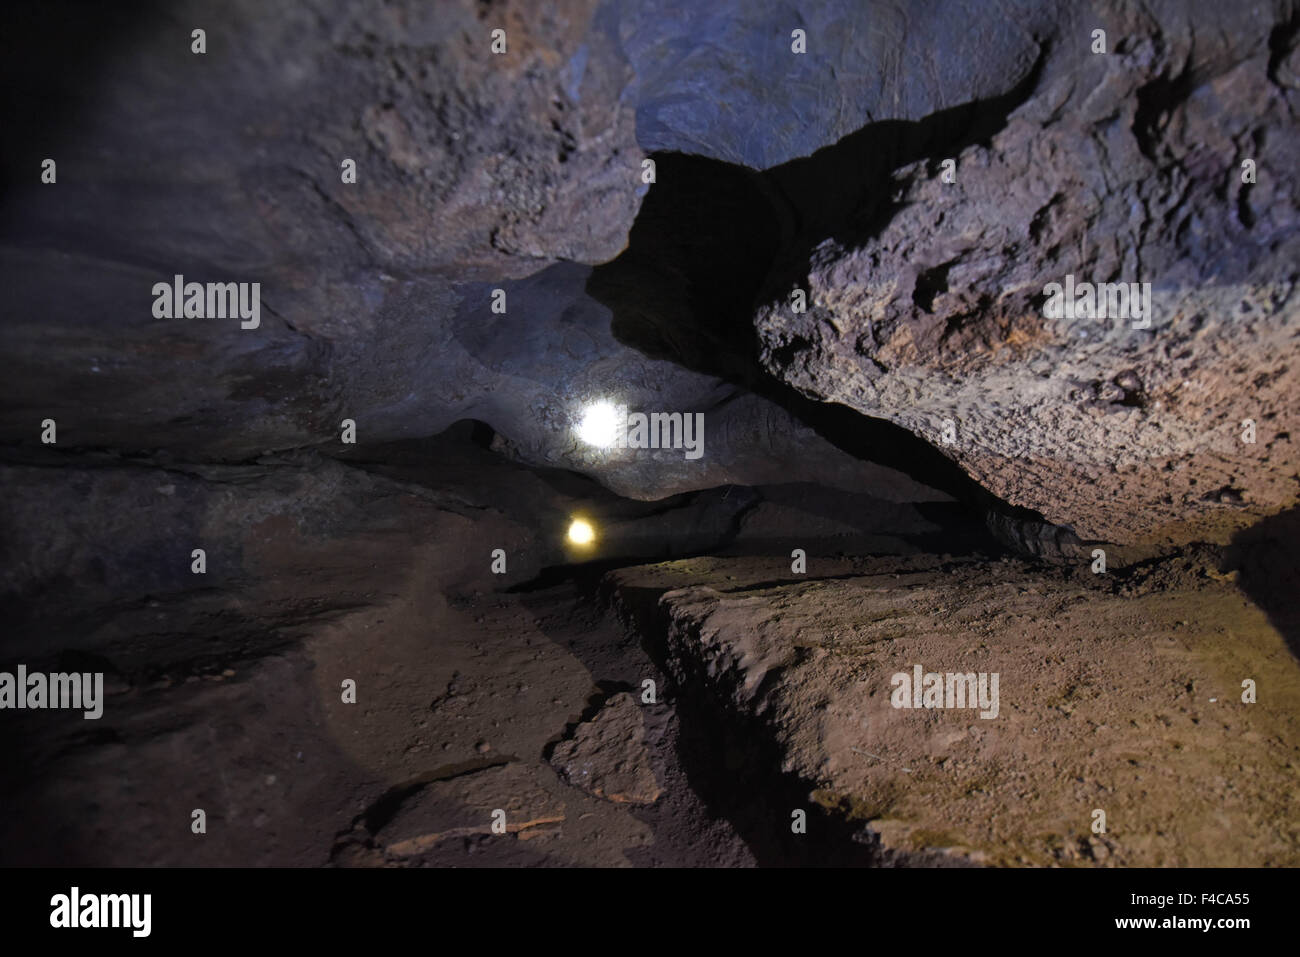 (151016) -- DAOXIAN, Oct. 16, 2015 (Xinhua) -- Photo taken on Oct. 16, 2015 shows the cave in which some tooth fossils were found at Daoxian County in central China's Hunan Province. Tooth fossils found in Daoxian indicate the early form of modern homo sapiens appeared in the region more than 80,000 years ago. The 47 fossils date back from 80,000 to 120,000 years and are believed to be the oldest remains of a completely modern form scientists have known in the east Asia region, the study's leading scientists said on Oct. 15, 2015.  (Xinhua/Li Ga) (yxb) Stock Photo